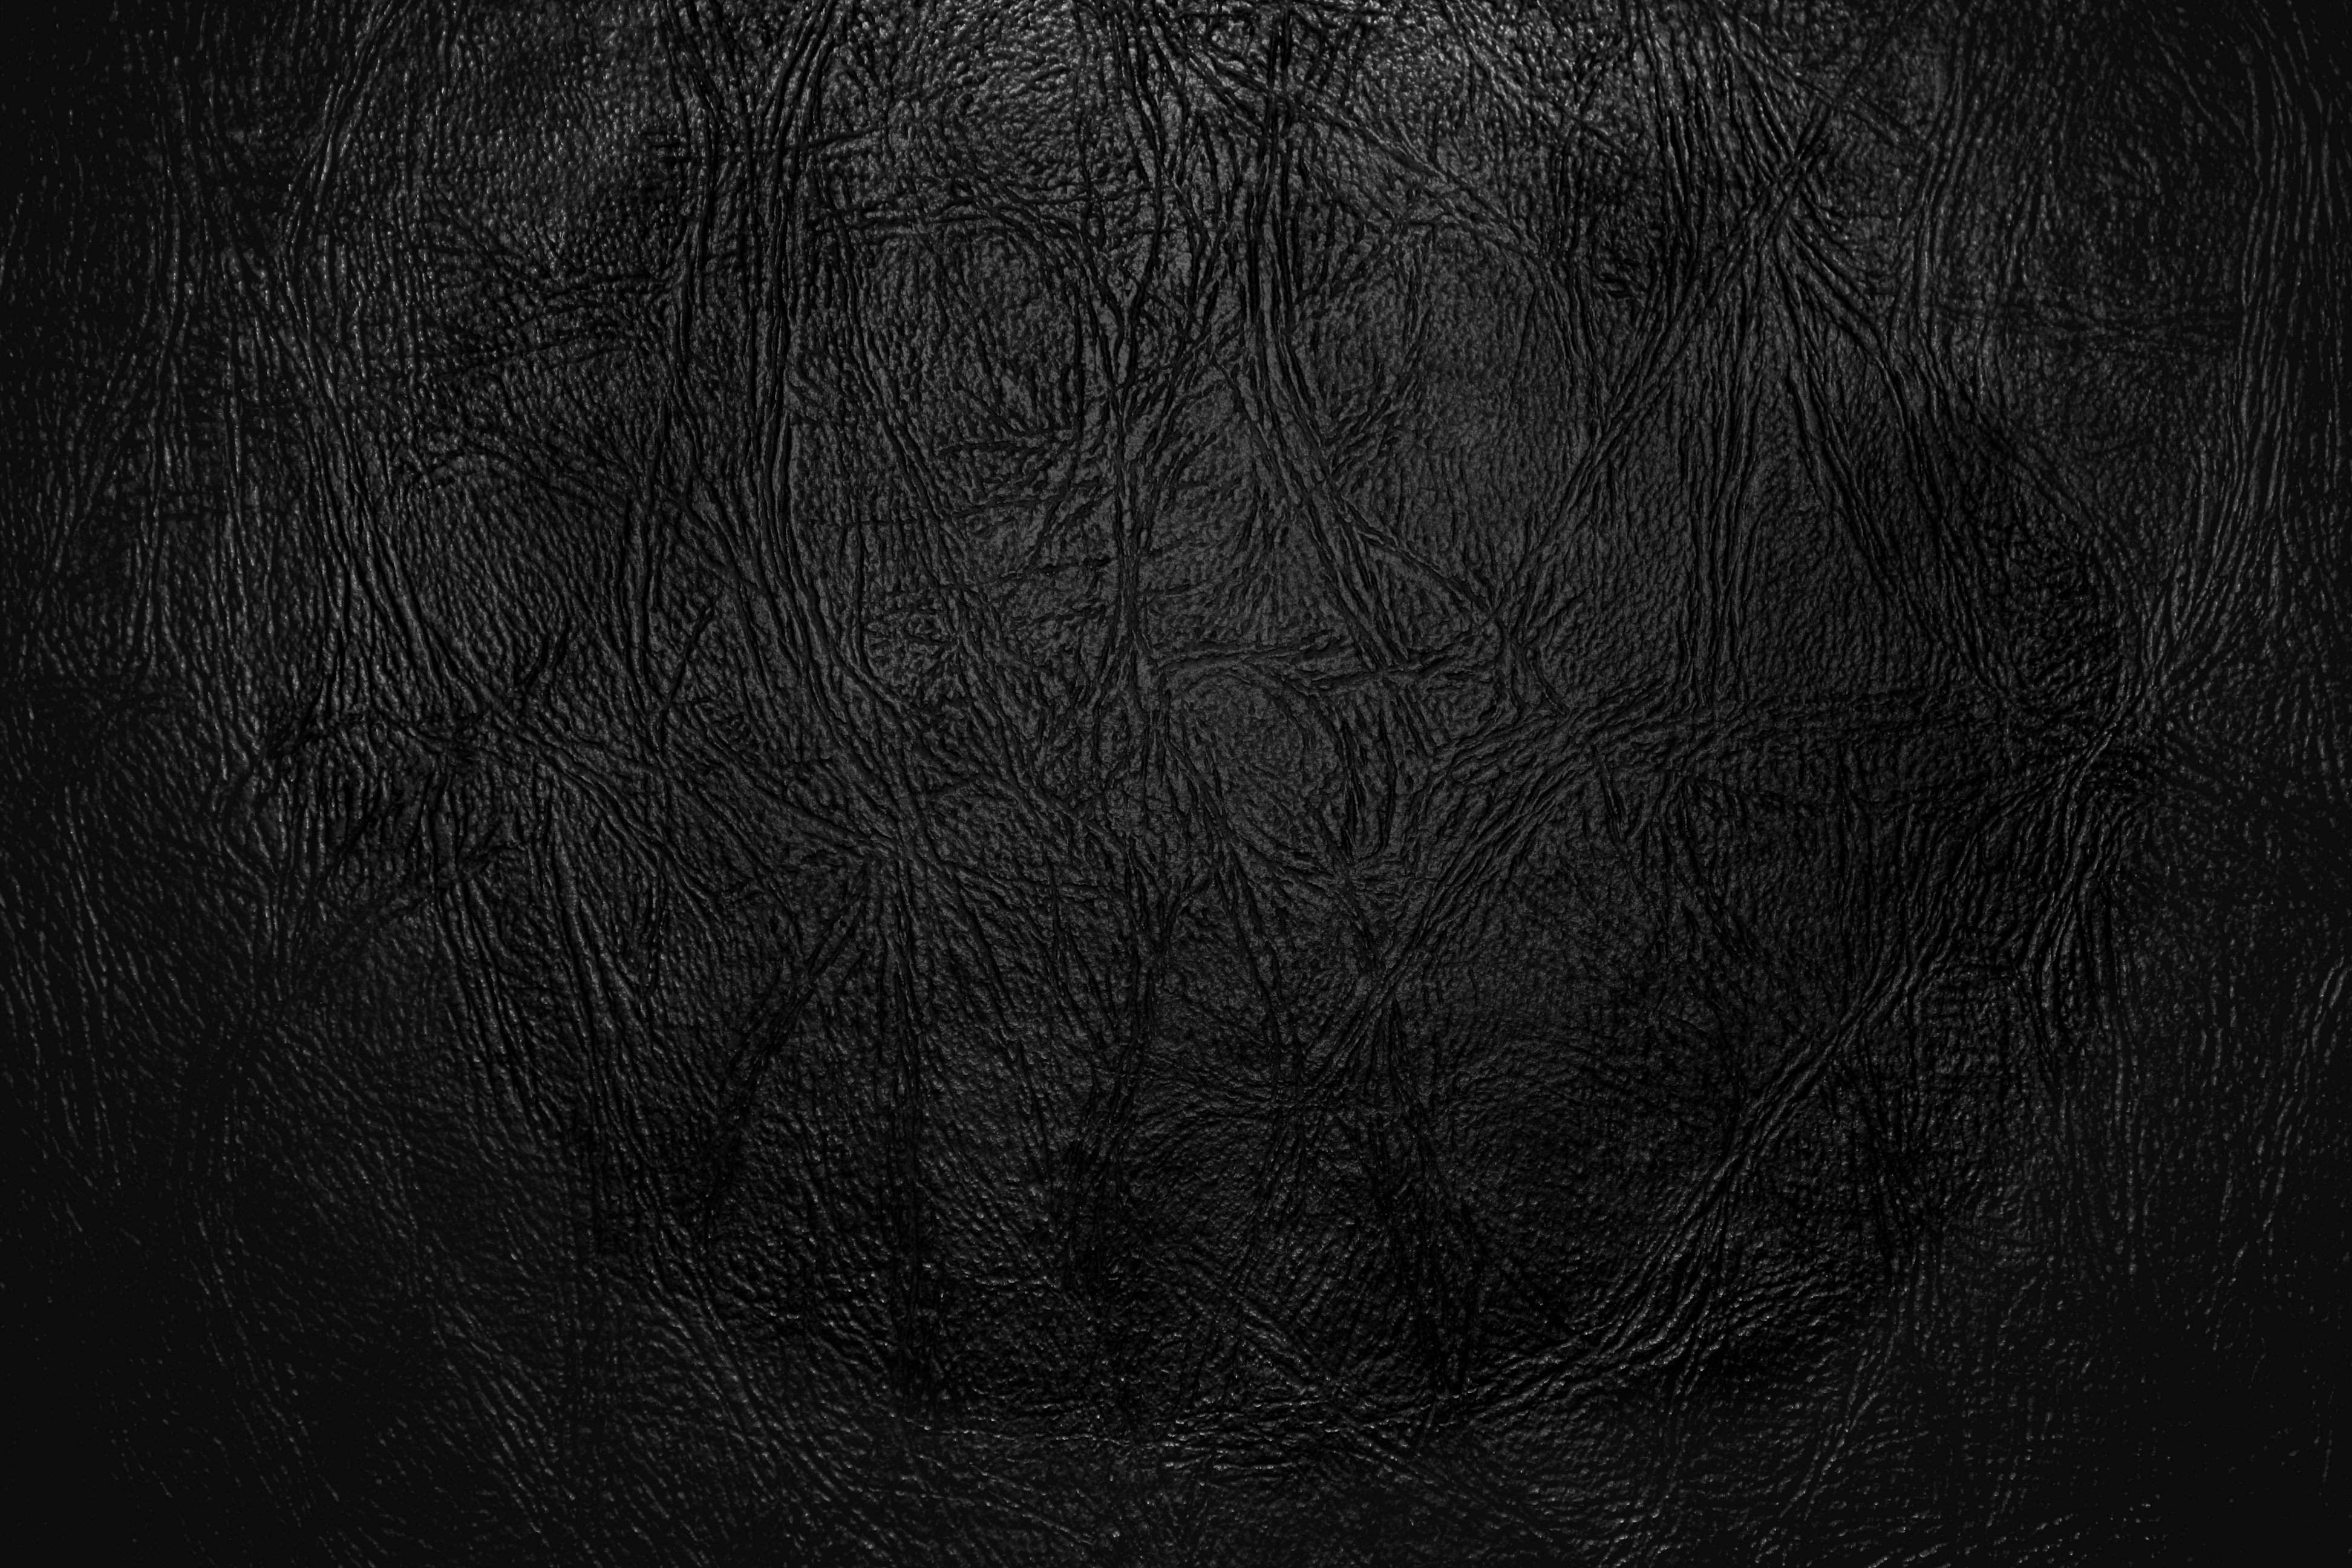 Black Leather | Black Leather Close Up Texture Picture | Free ...